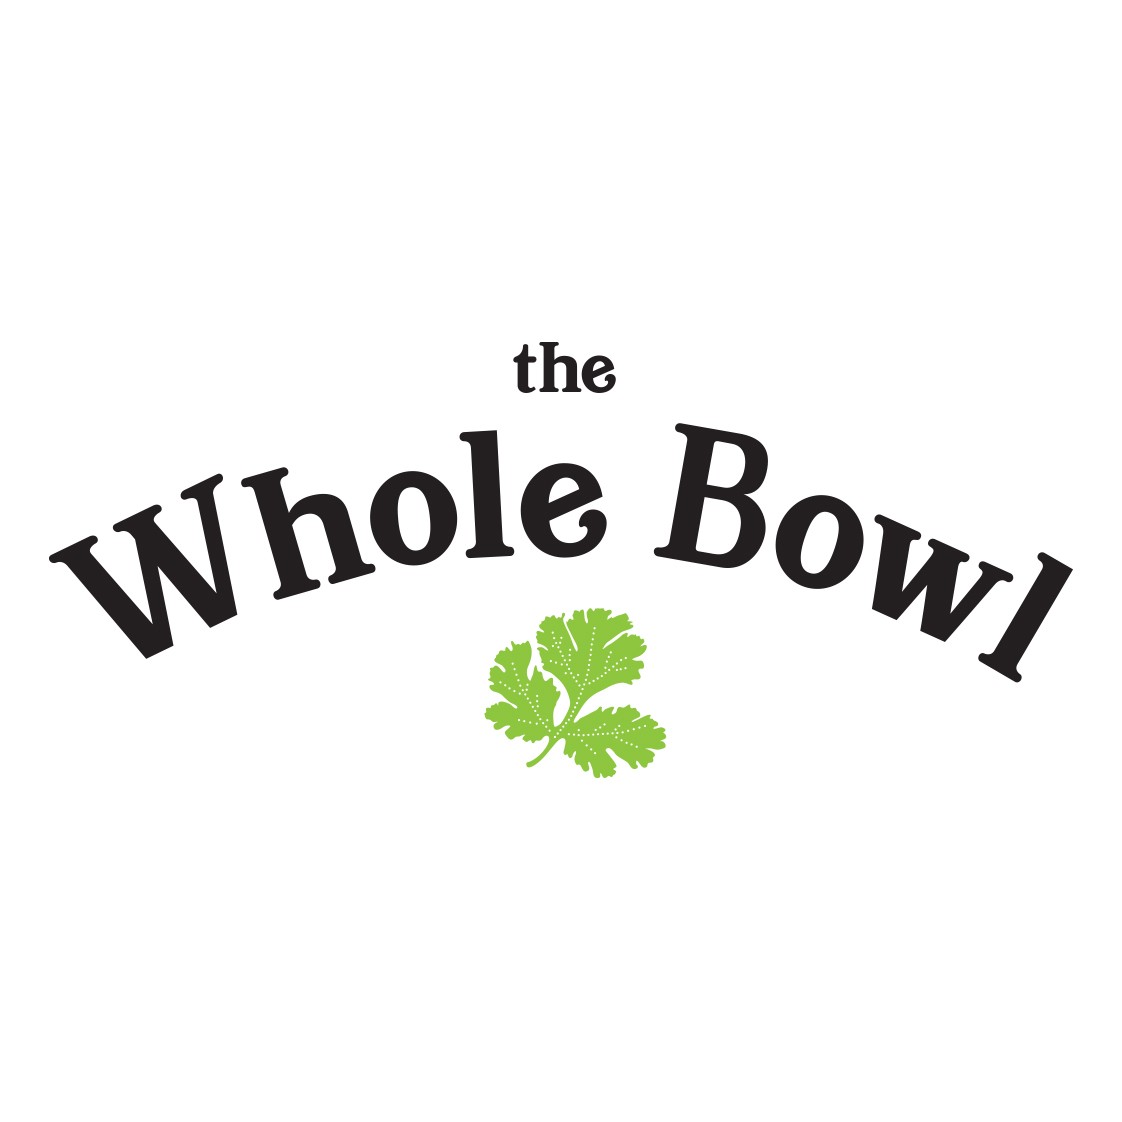 Whole Bowl - Quimby 1515 NW 23rd Ave.